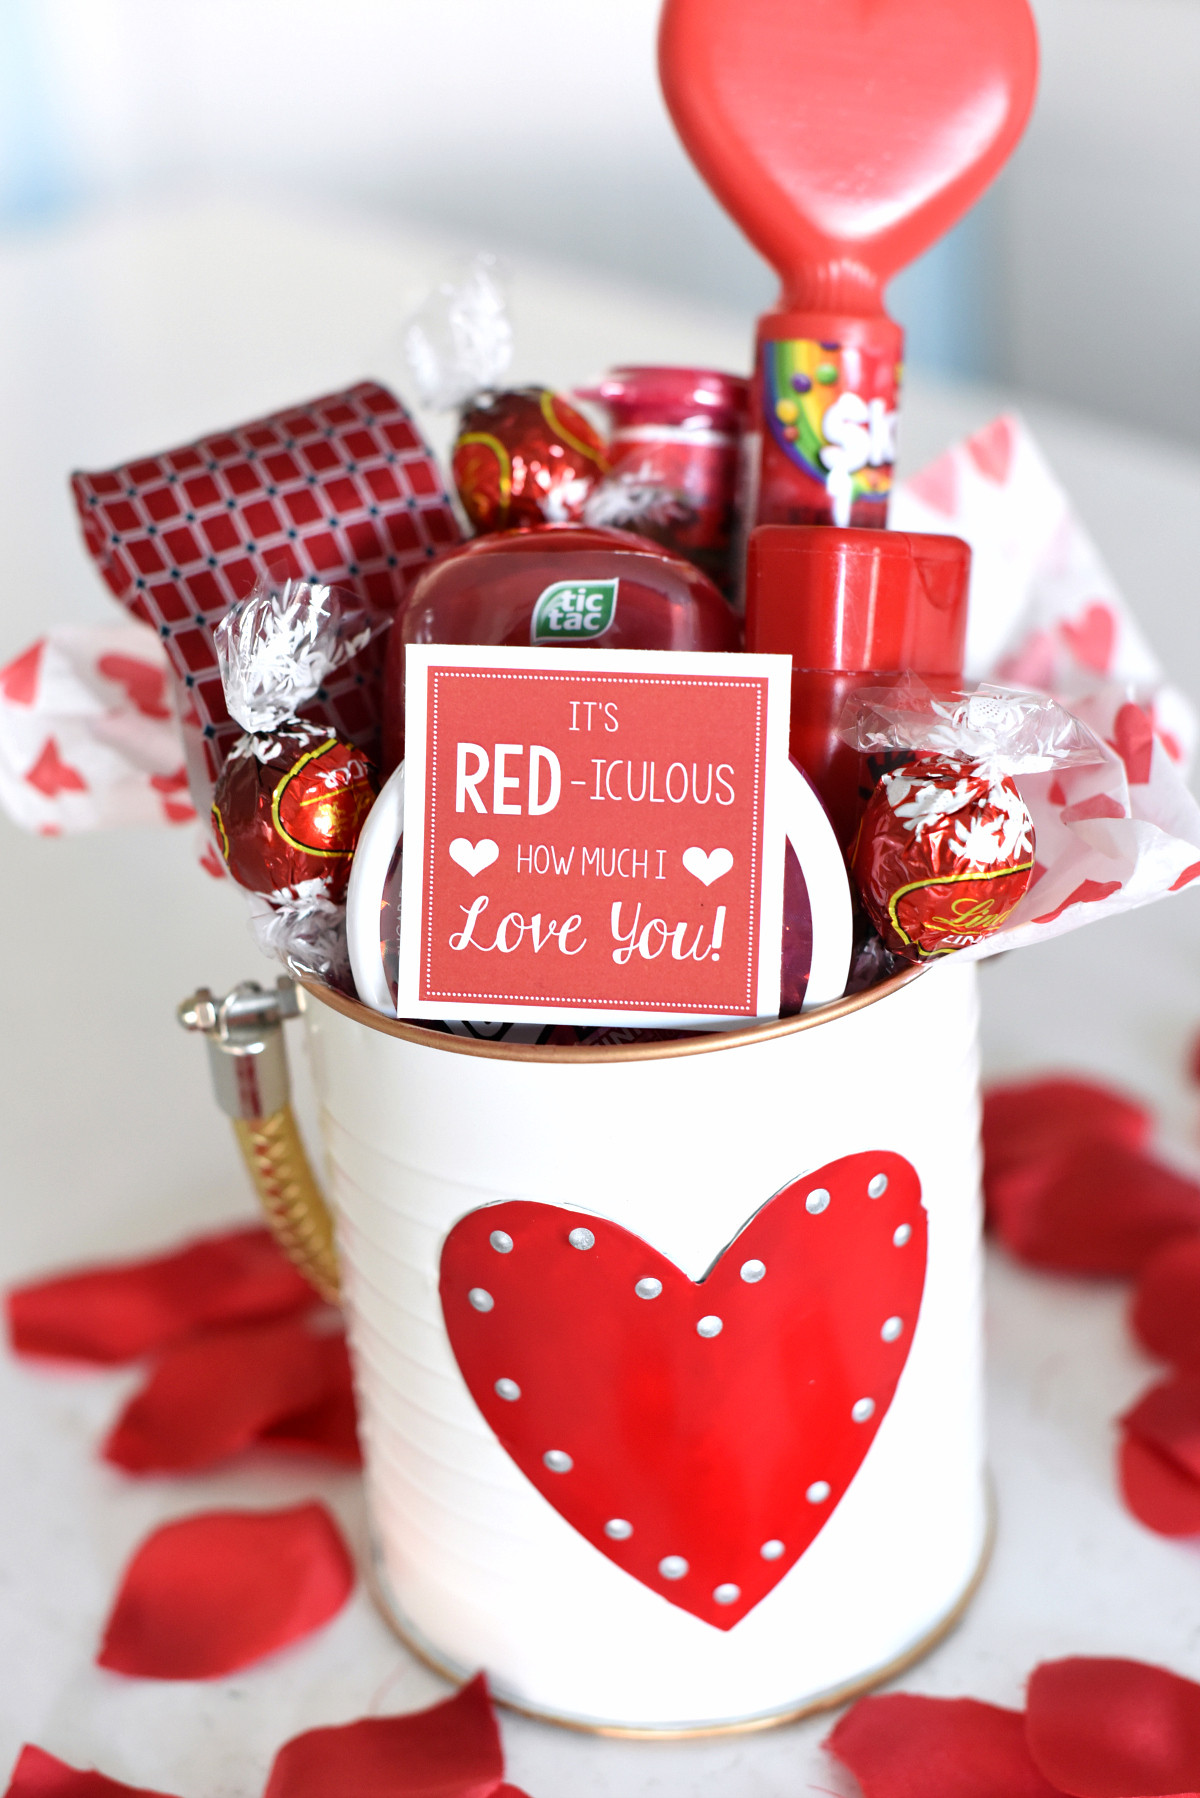 Good Gift Ideas For Girlfriend Valentines Day
 Cute Valentine s Day Gift Idea RED iculous Basket